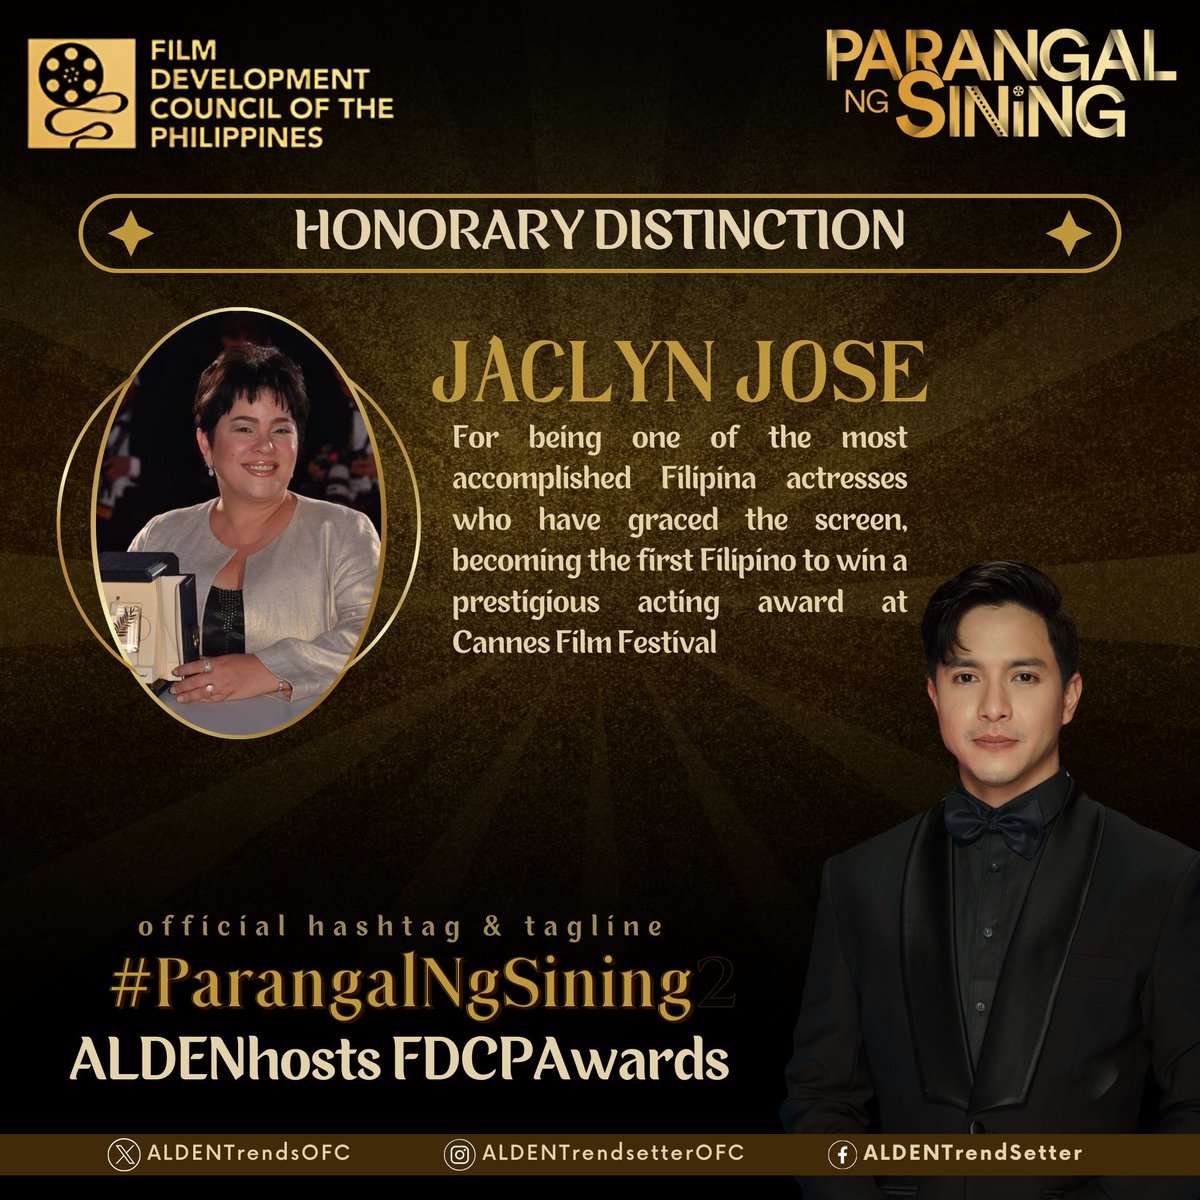 For the Honorary Distinction, Ms. Jaclyn Jose, someone really close to Alden's heart (his Tita Jane) ❤️ She's one of the most accomplished Filipina actresses of all time. TRULY PRICELESS! 🏆 @aldenrichards02 @fdcpofficial #ParangalNgSining #ALDENRichards ALDENhosts…